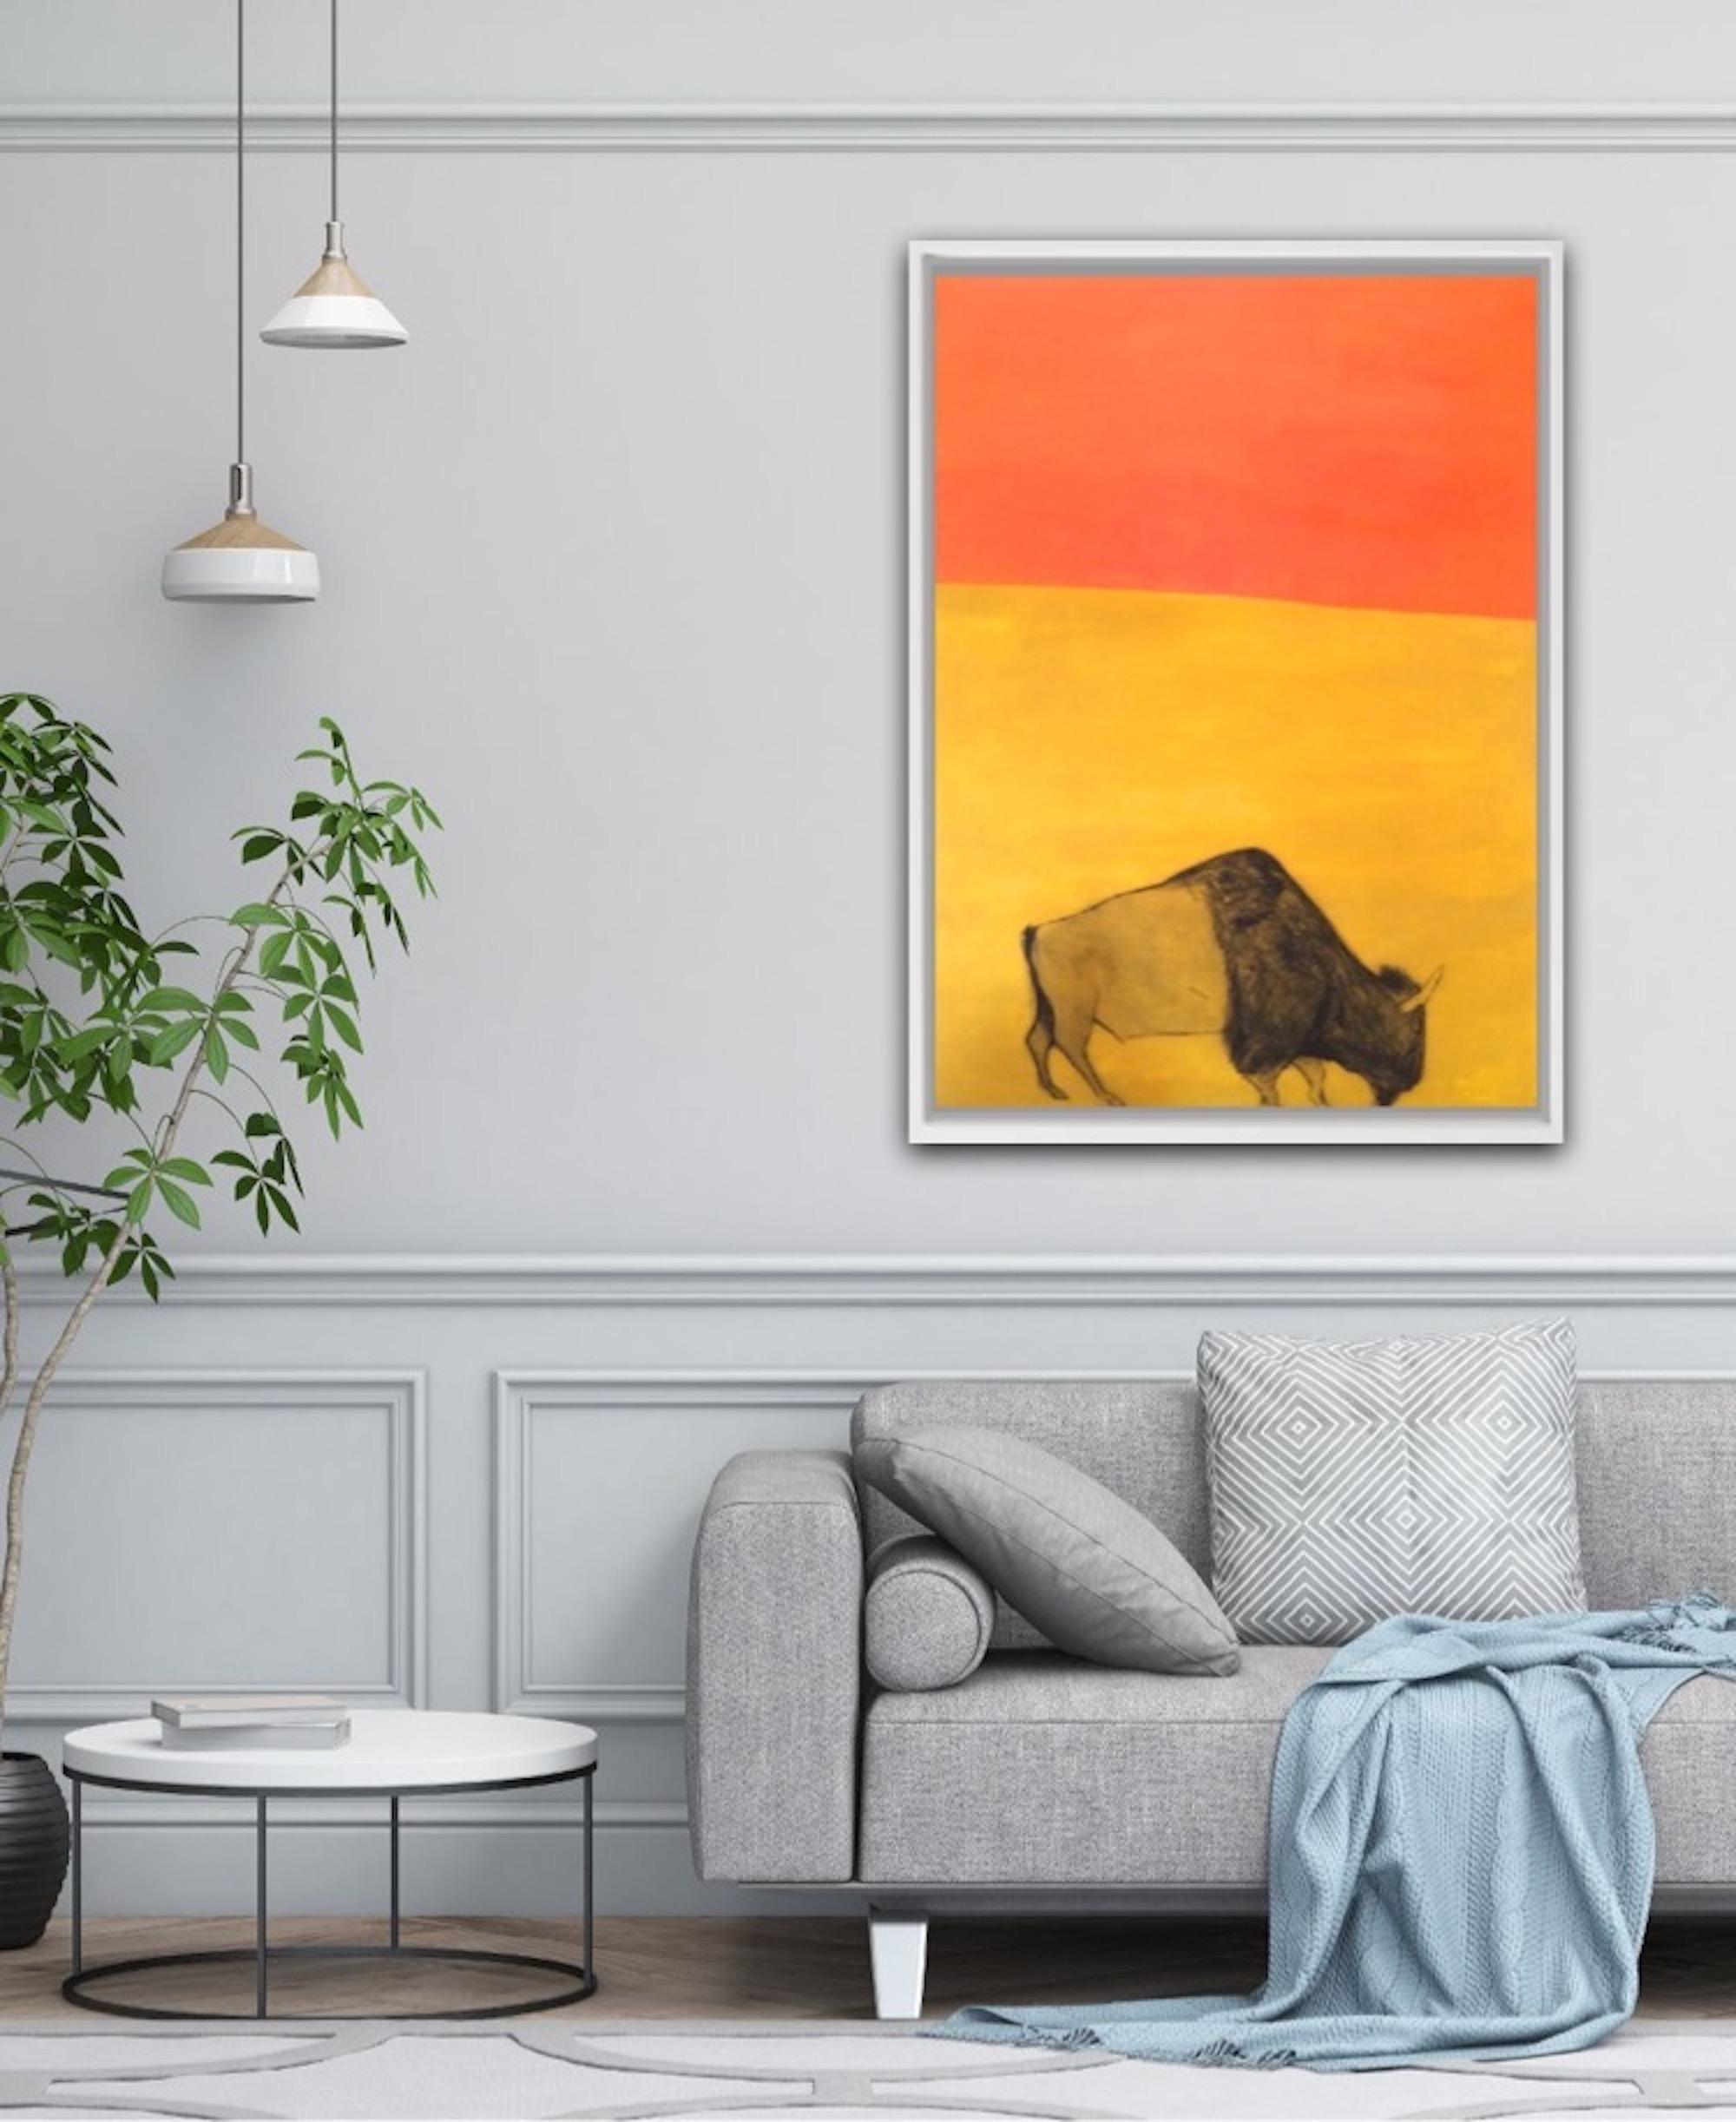 I feel like an African Prince, limited edition print, bison print - Print by Kate Boxer 